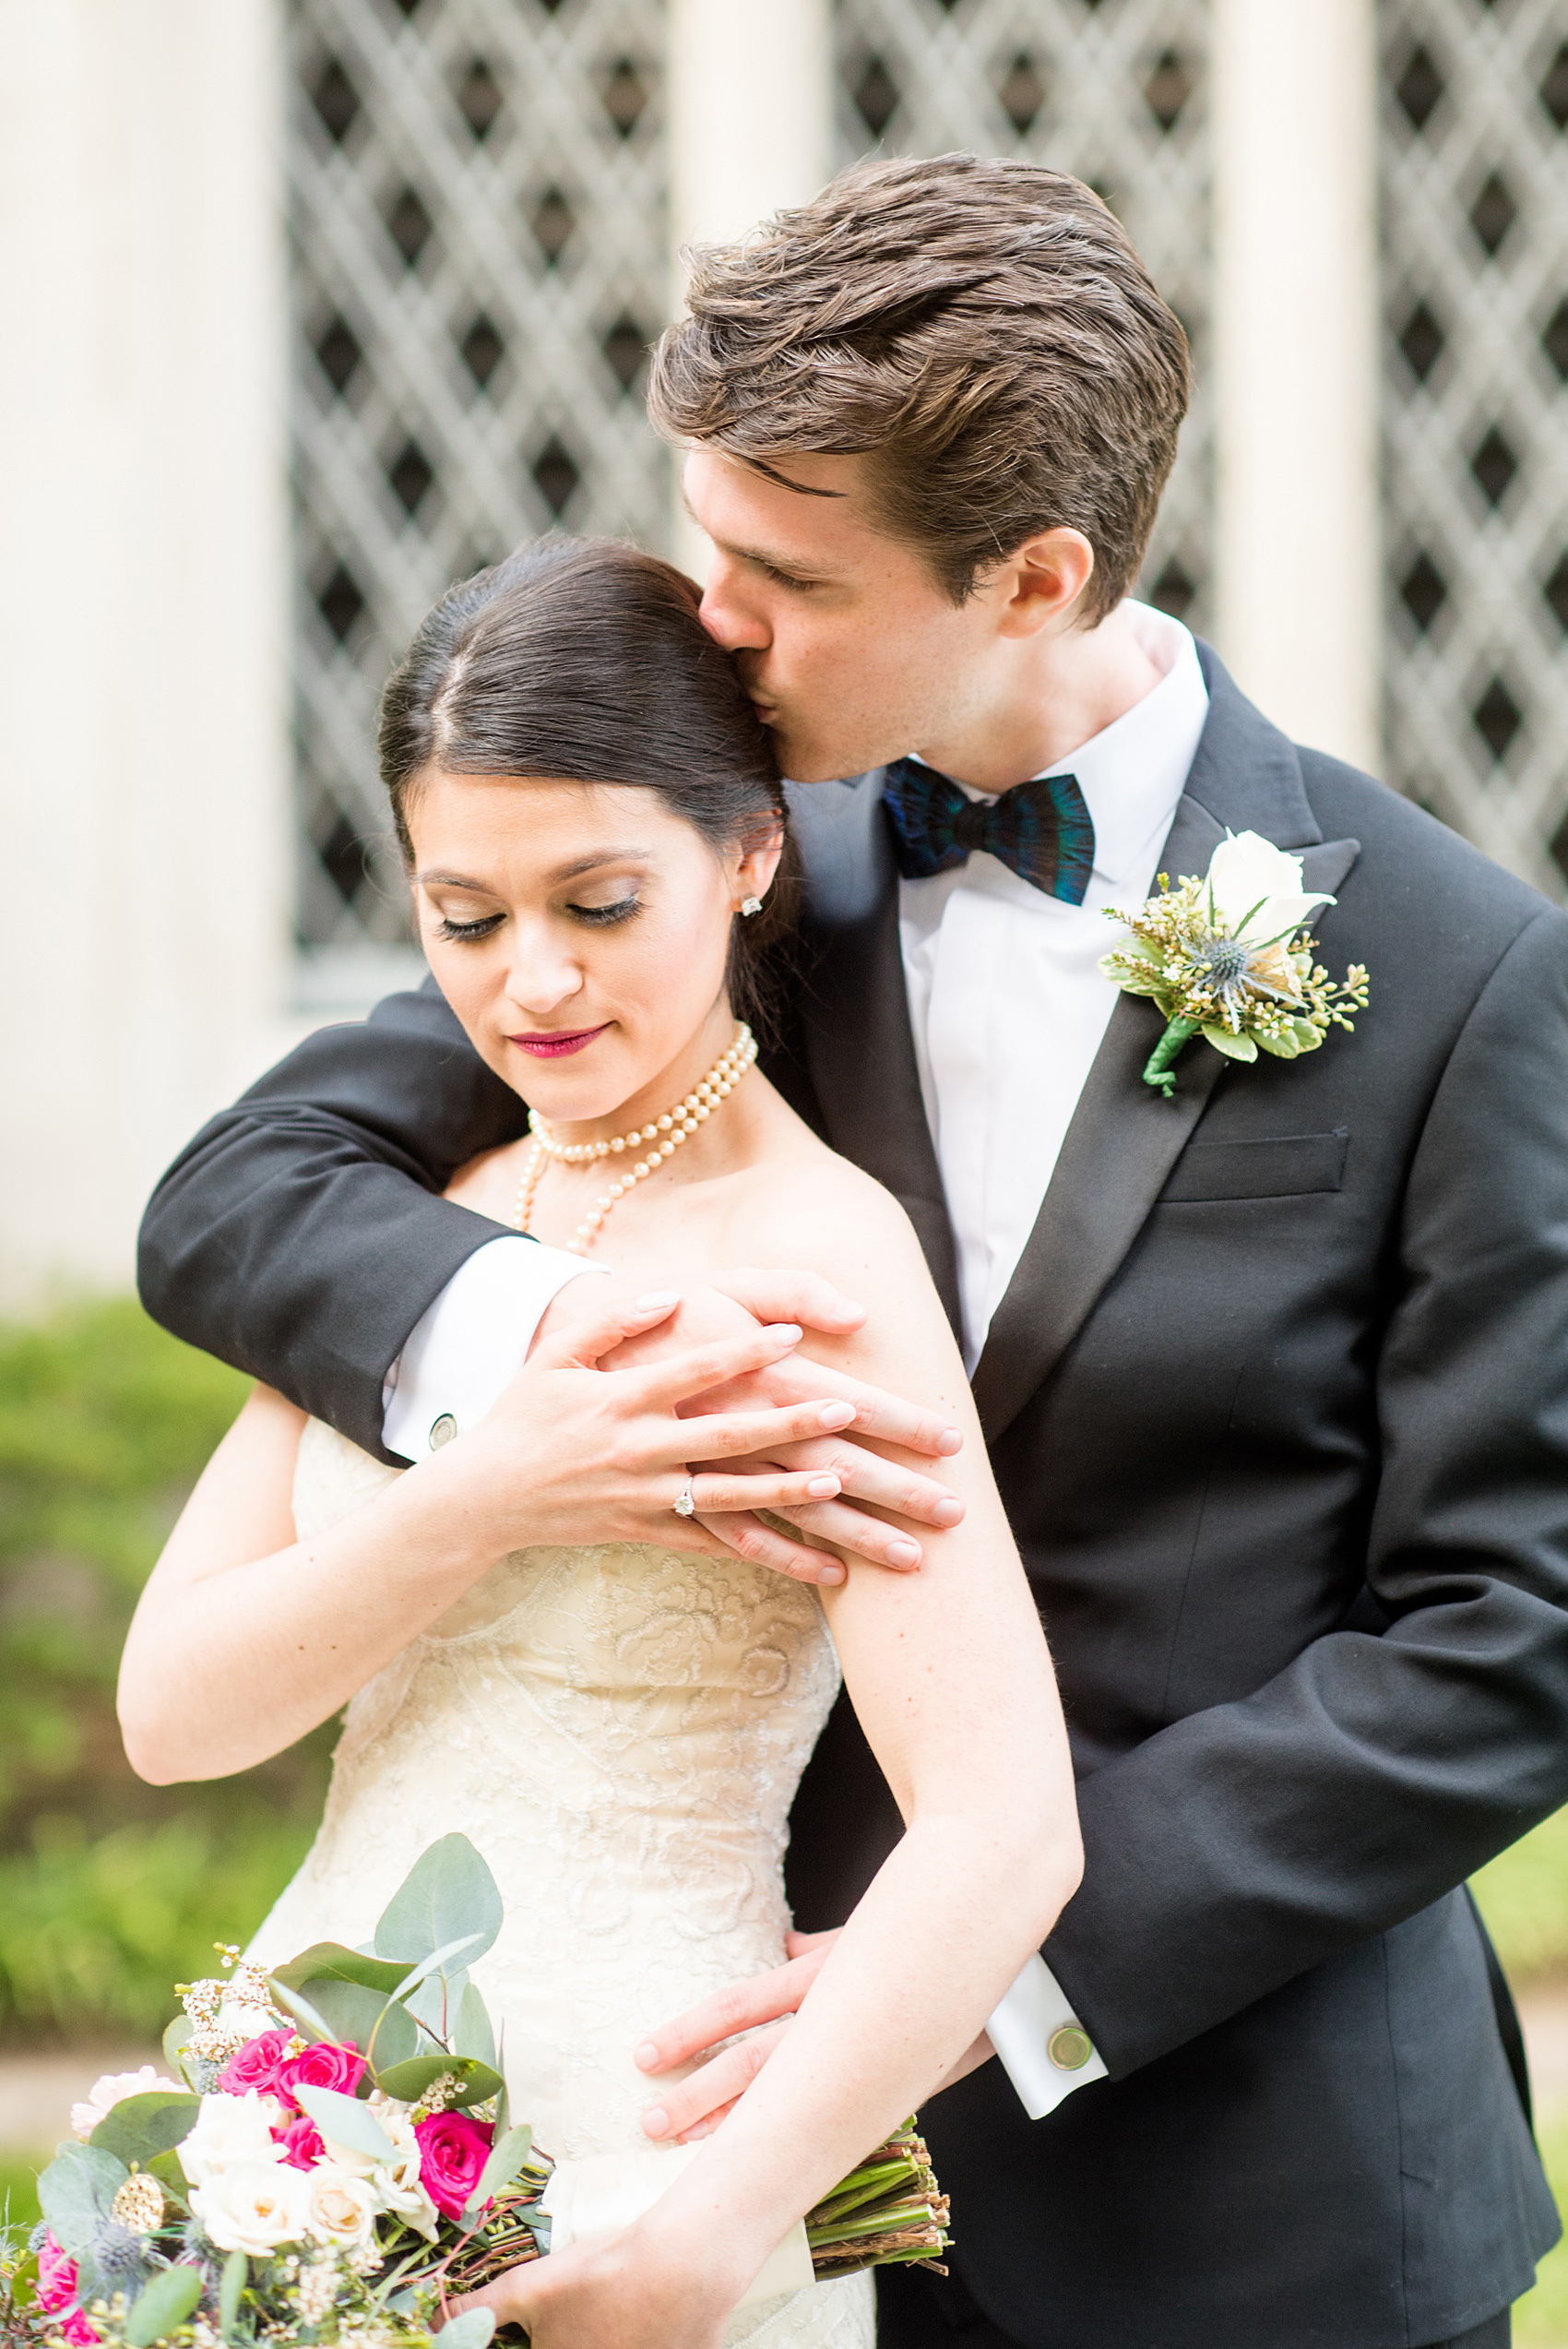 Mikkel Paige Photography photo of a wedding in Chapel Hill at Duke Chapel. Bride and groom with the gothic architecture. A picture of the couple in a black tuxedo strapless sweetheart off-white gown.